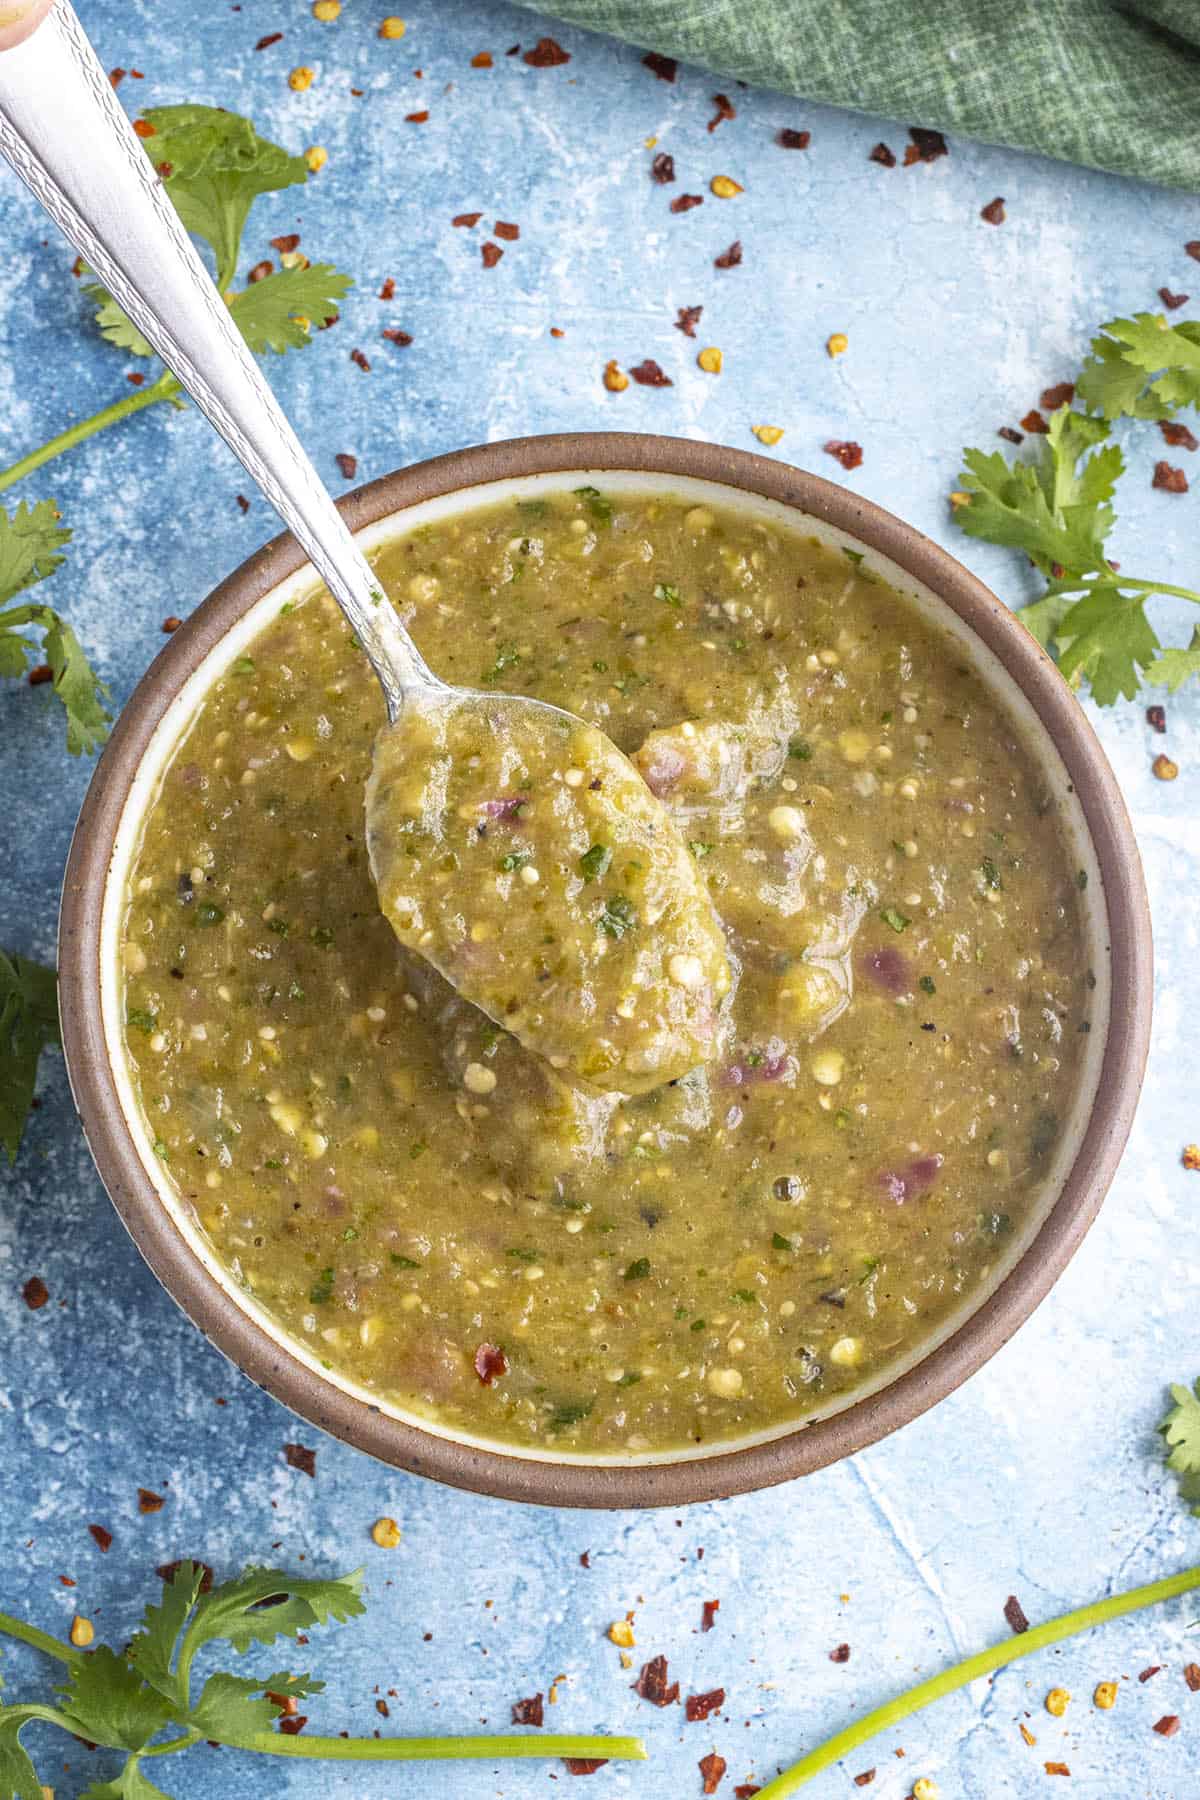 Creamy Tomatillo Sauce in a bowl with a spoon